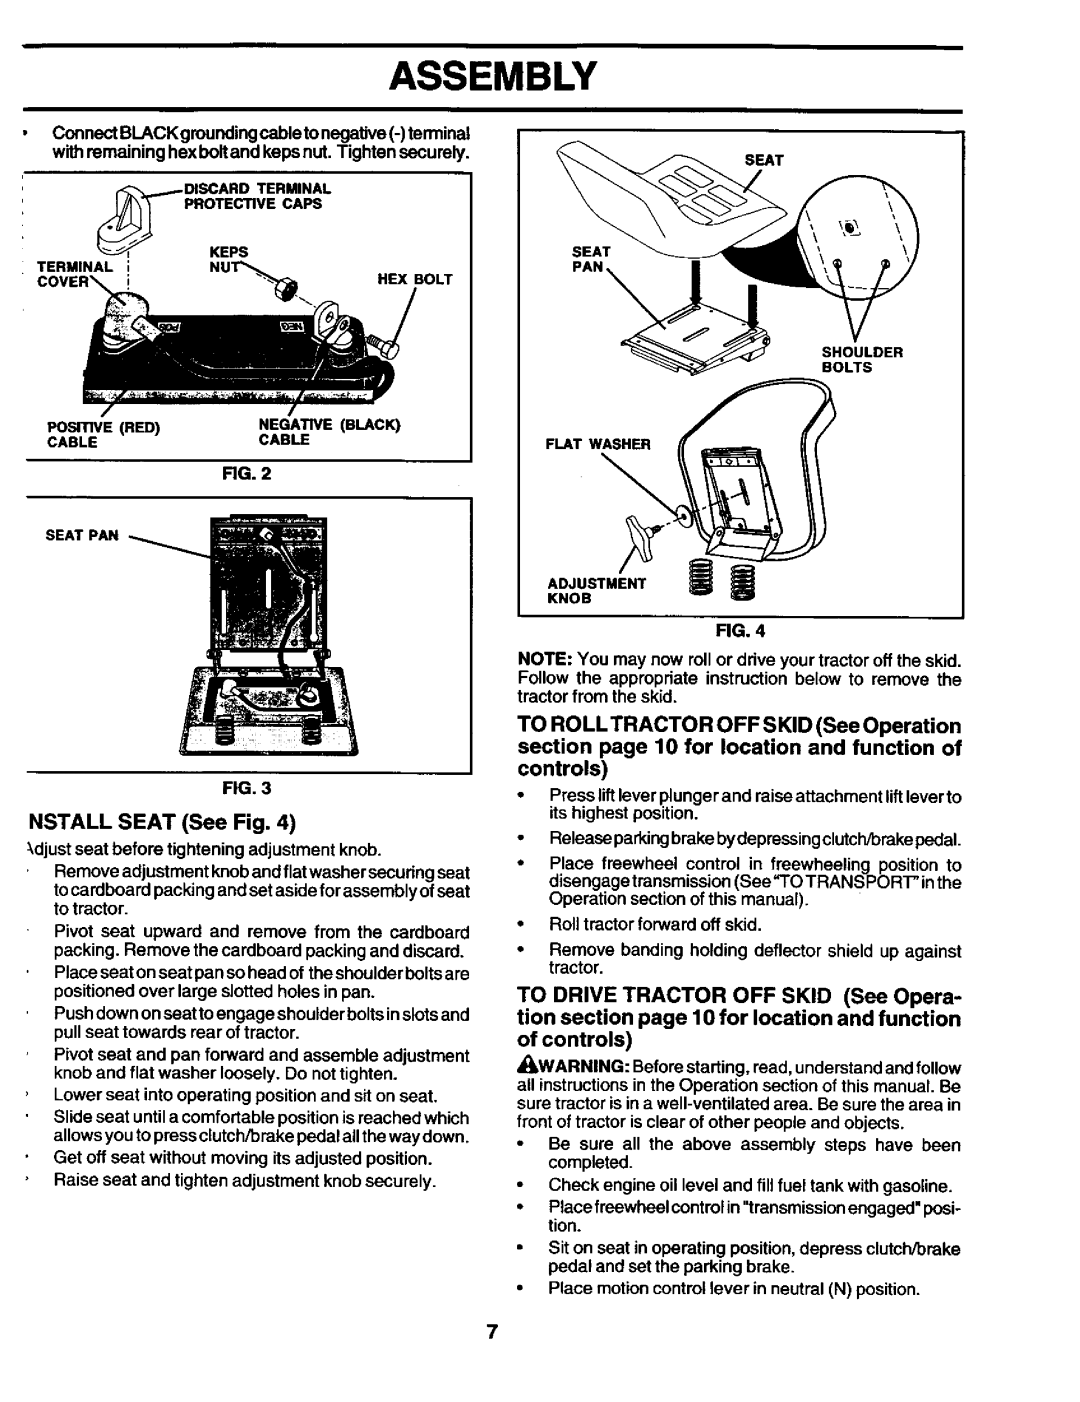 Craftsman 944.602951 owner manual Assembly, TO ROLL TRACTOR OFF SKID See Operation, of controls 